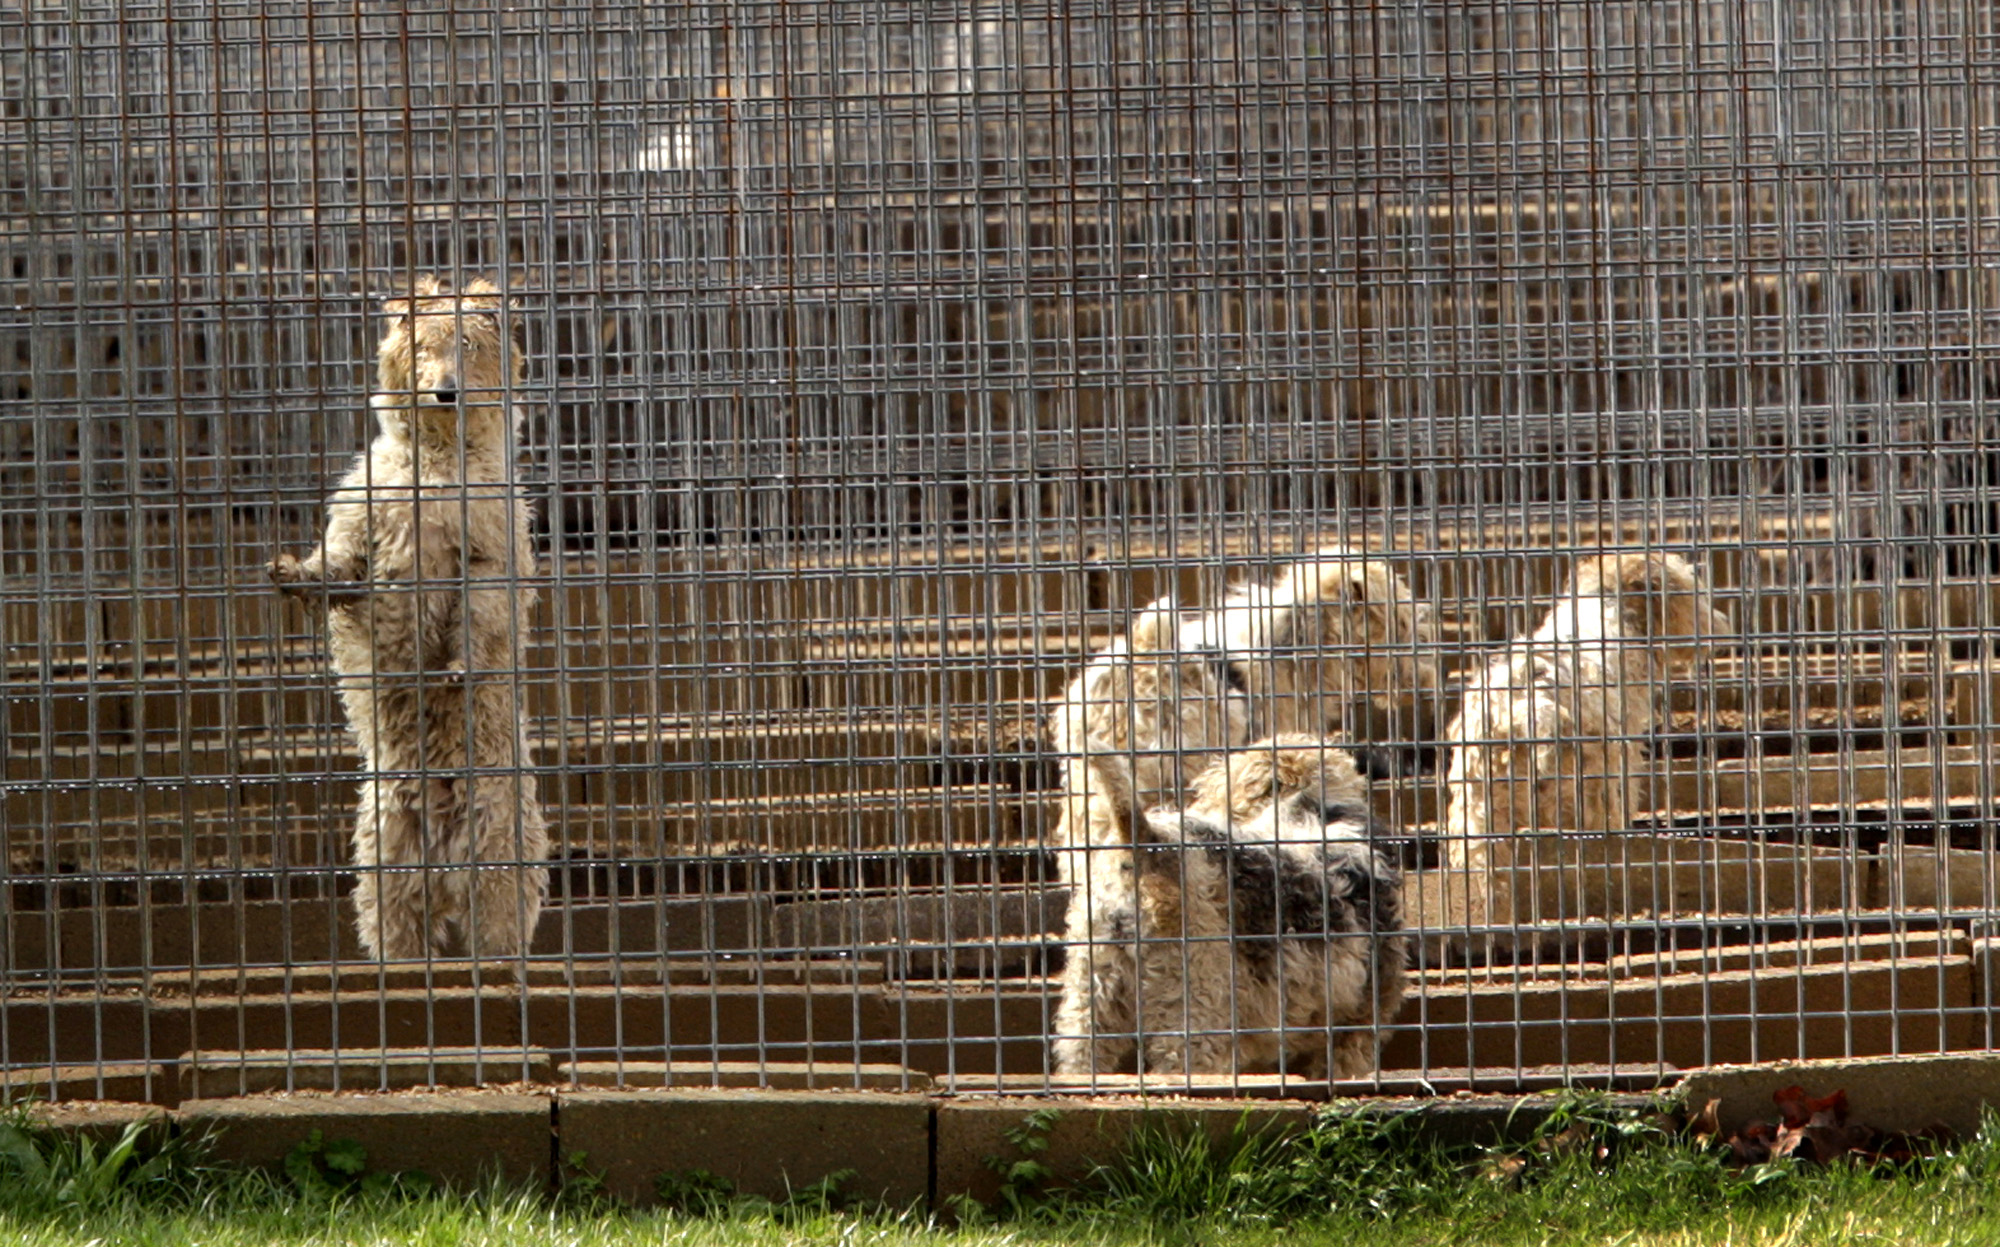 How many puppy mills does Missouri have?